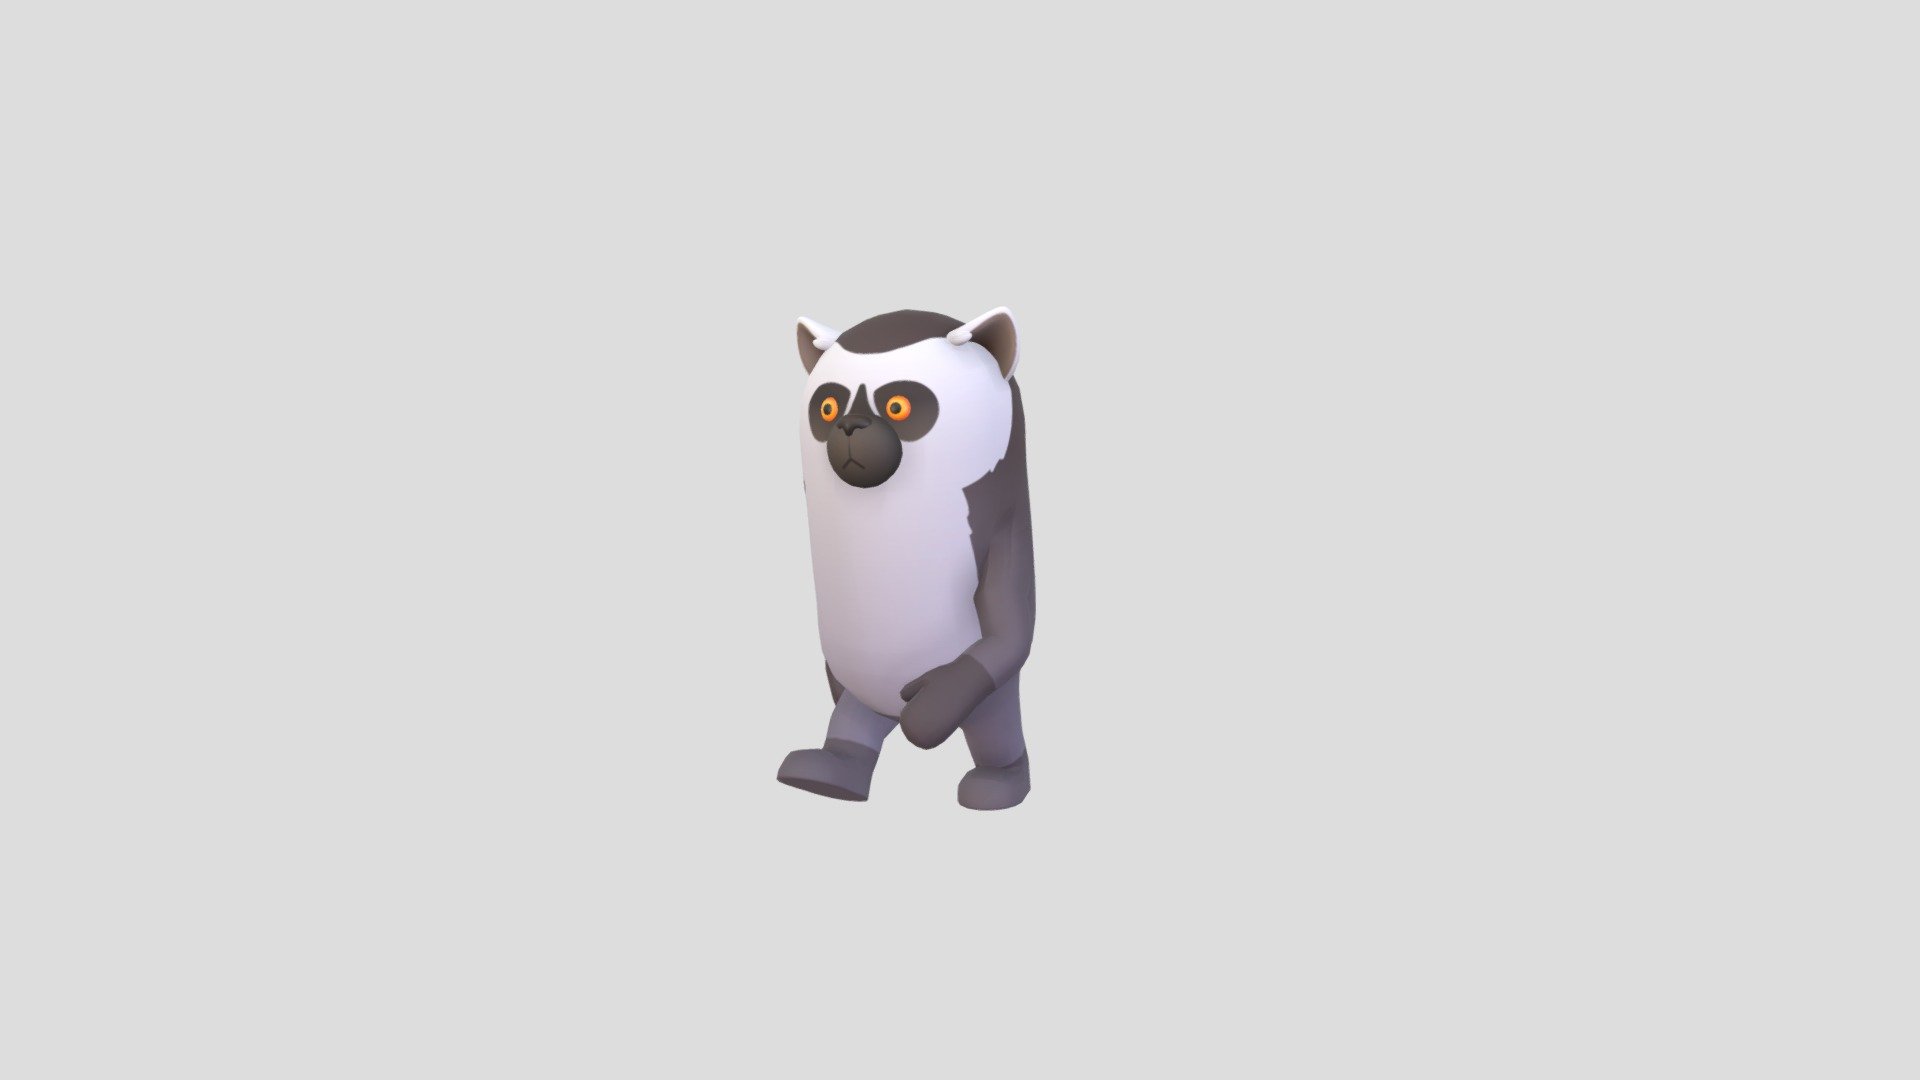 Rigged Lemur Character 3d model.      
    


File Formats      
 
- 3ds max 2023 (Rigged With CAT)  
 
- FBX  (Rigged) 
 
- OBJ  (NoRig) 
    


Clean topology    

Body Rigged  

No Facial Rig  or Blendshapes 

No Animations  

Non-overlapping unwrapped UVs        
 


PNG texture               

2048x2048                


- Base Color                        

- Normal                            

- Roughness                         



2,728 polygons                          

2,821 vertexs                          
 - Rigged Lemur Character - Buy Royalty Free 3D model by bariacg 3d model